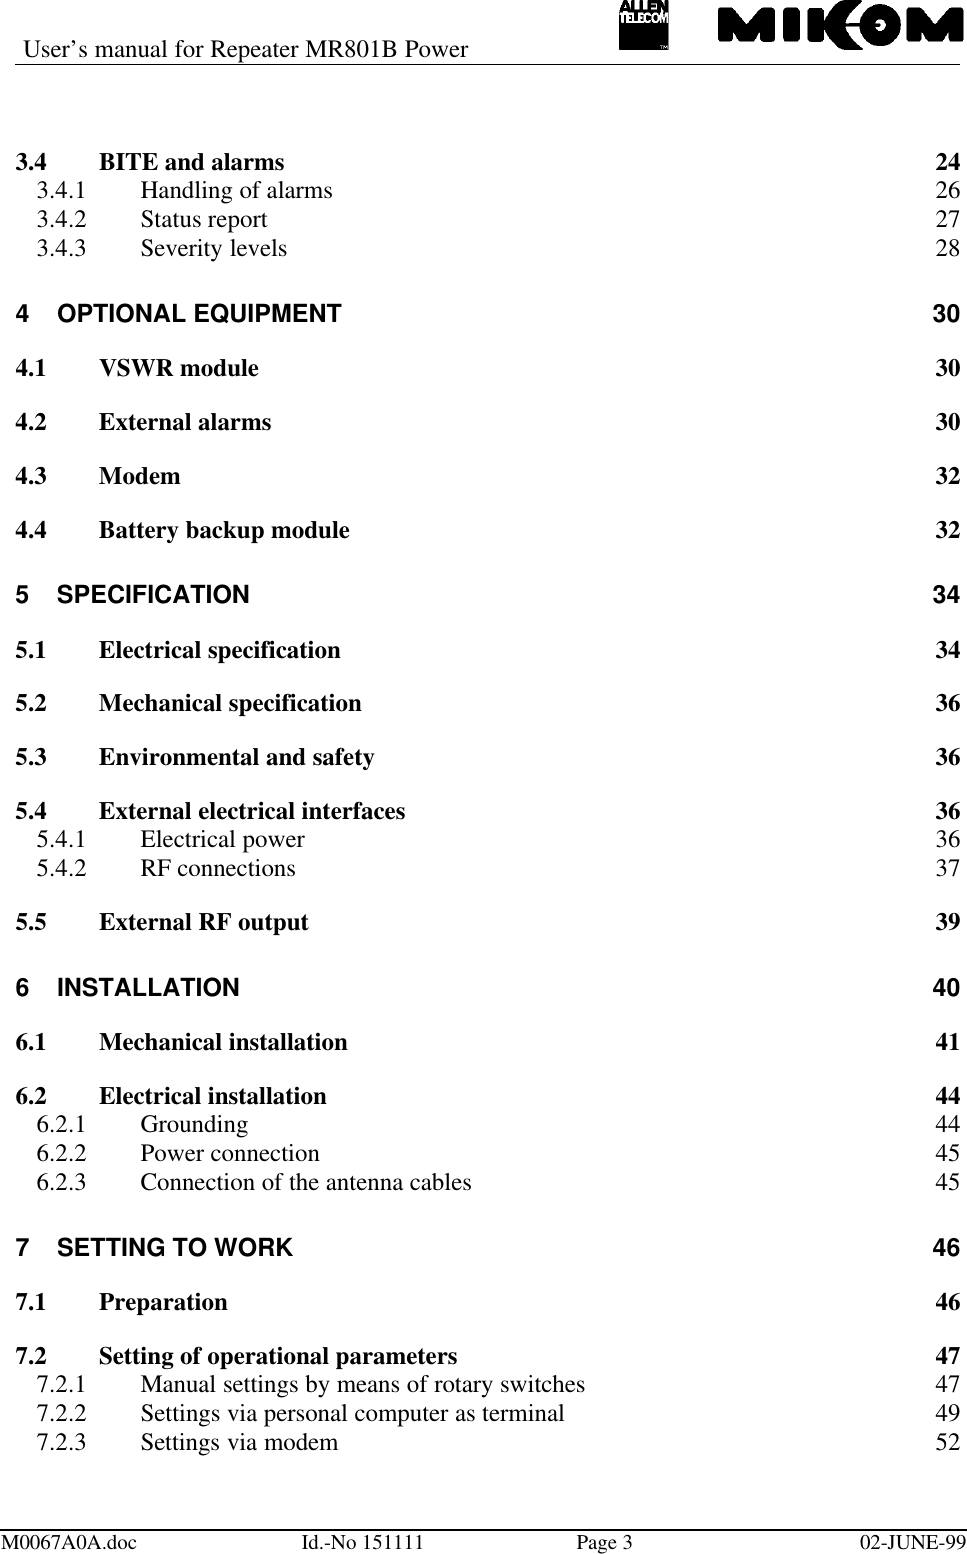 User’s manual for Repeater MR801B PowerM0067A0A.doc Id.-No 151111 Page 302-JUNE-993.4 BITE and alarms 243.4.1 Handling of alarms 263.4.2 Status report 273.4.3 Severity levels 284OPTIONAL EQUIPMENT 304.1 VSWR module 304.2 External alarms 304.3 Modem 324.4 Battery backup module 325SPECIFICATION 345.1 Electrical specification 345.2 Mechanical specification 365.3 Environmental and safety 365.4 External electrical interfaces 365.4.1 Electrical power 365.4.2 RF connections 375.5 External RF output 396INSTALLATION 406.1 Mechanical installation 416.2 Electrical installation 446.2.1 Grounding 446.2.2 Power connection 456.2.3 Connection of the antenna cables 457SETTING TO WORK 467.1 Preparation 467.2 Setting of operational parameters 477.2.1 Manual settings by means of rotary switches 477.2.2 Settings via personal computer as terminal 497.2.3 Settings via modem 52